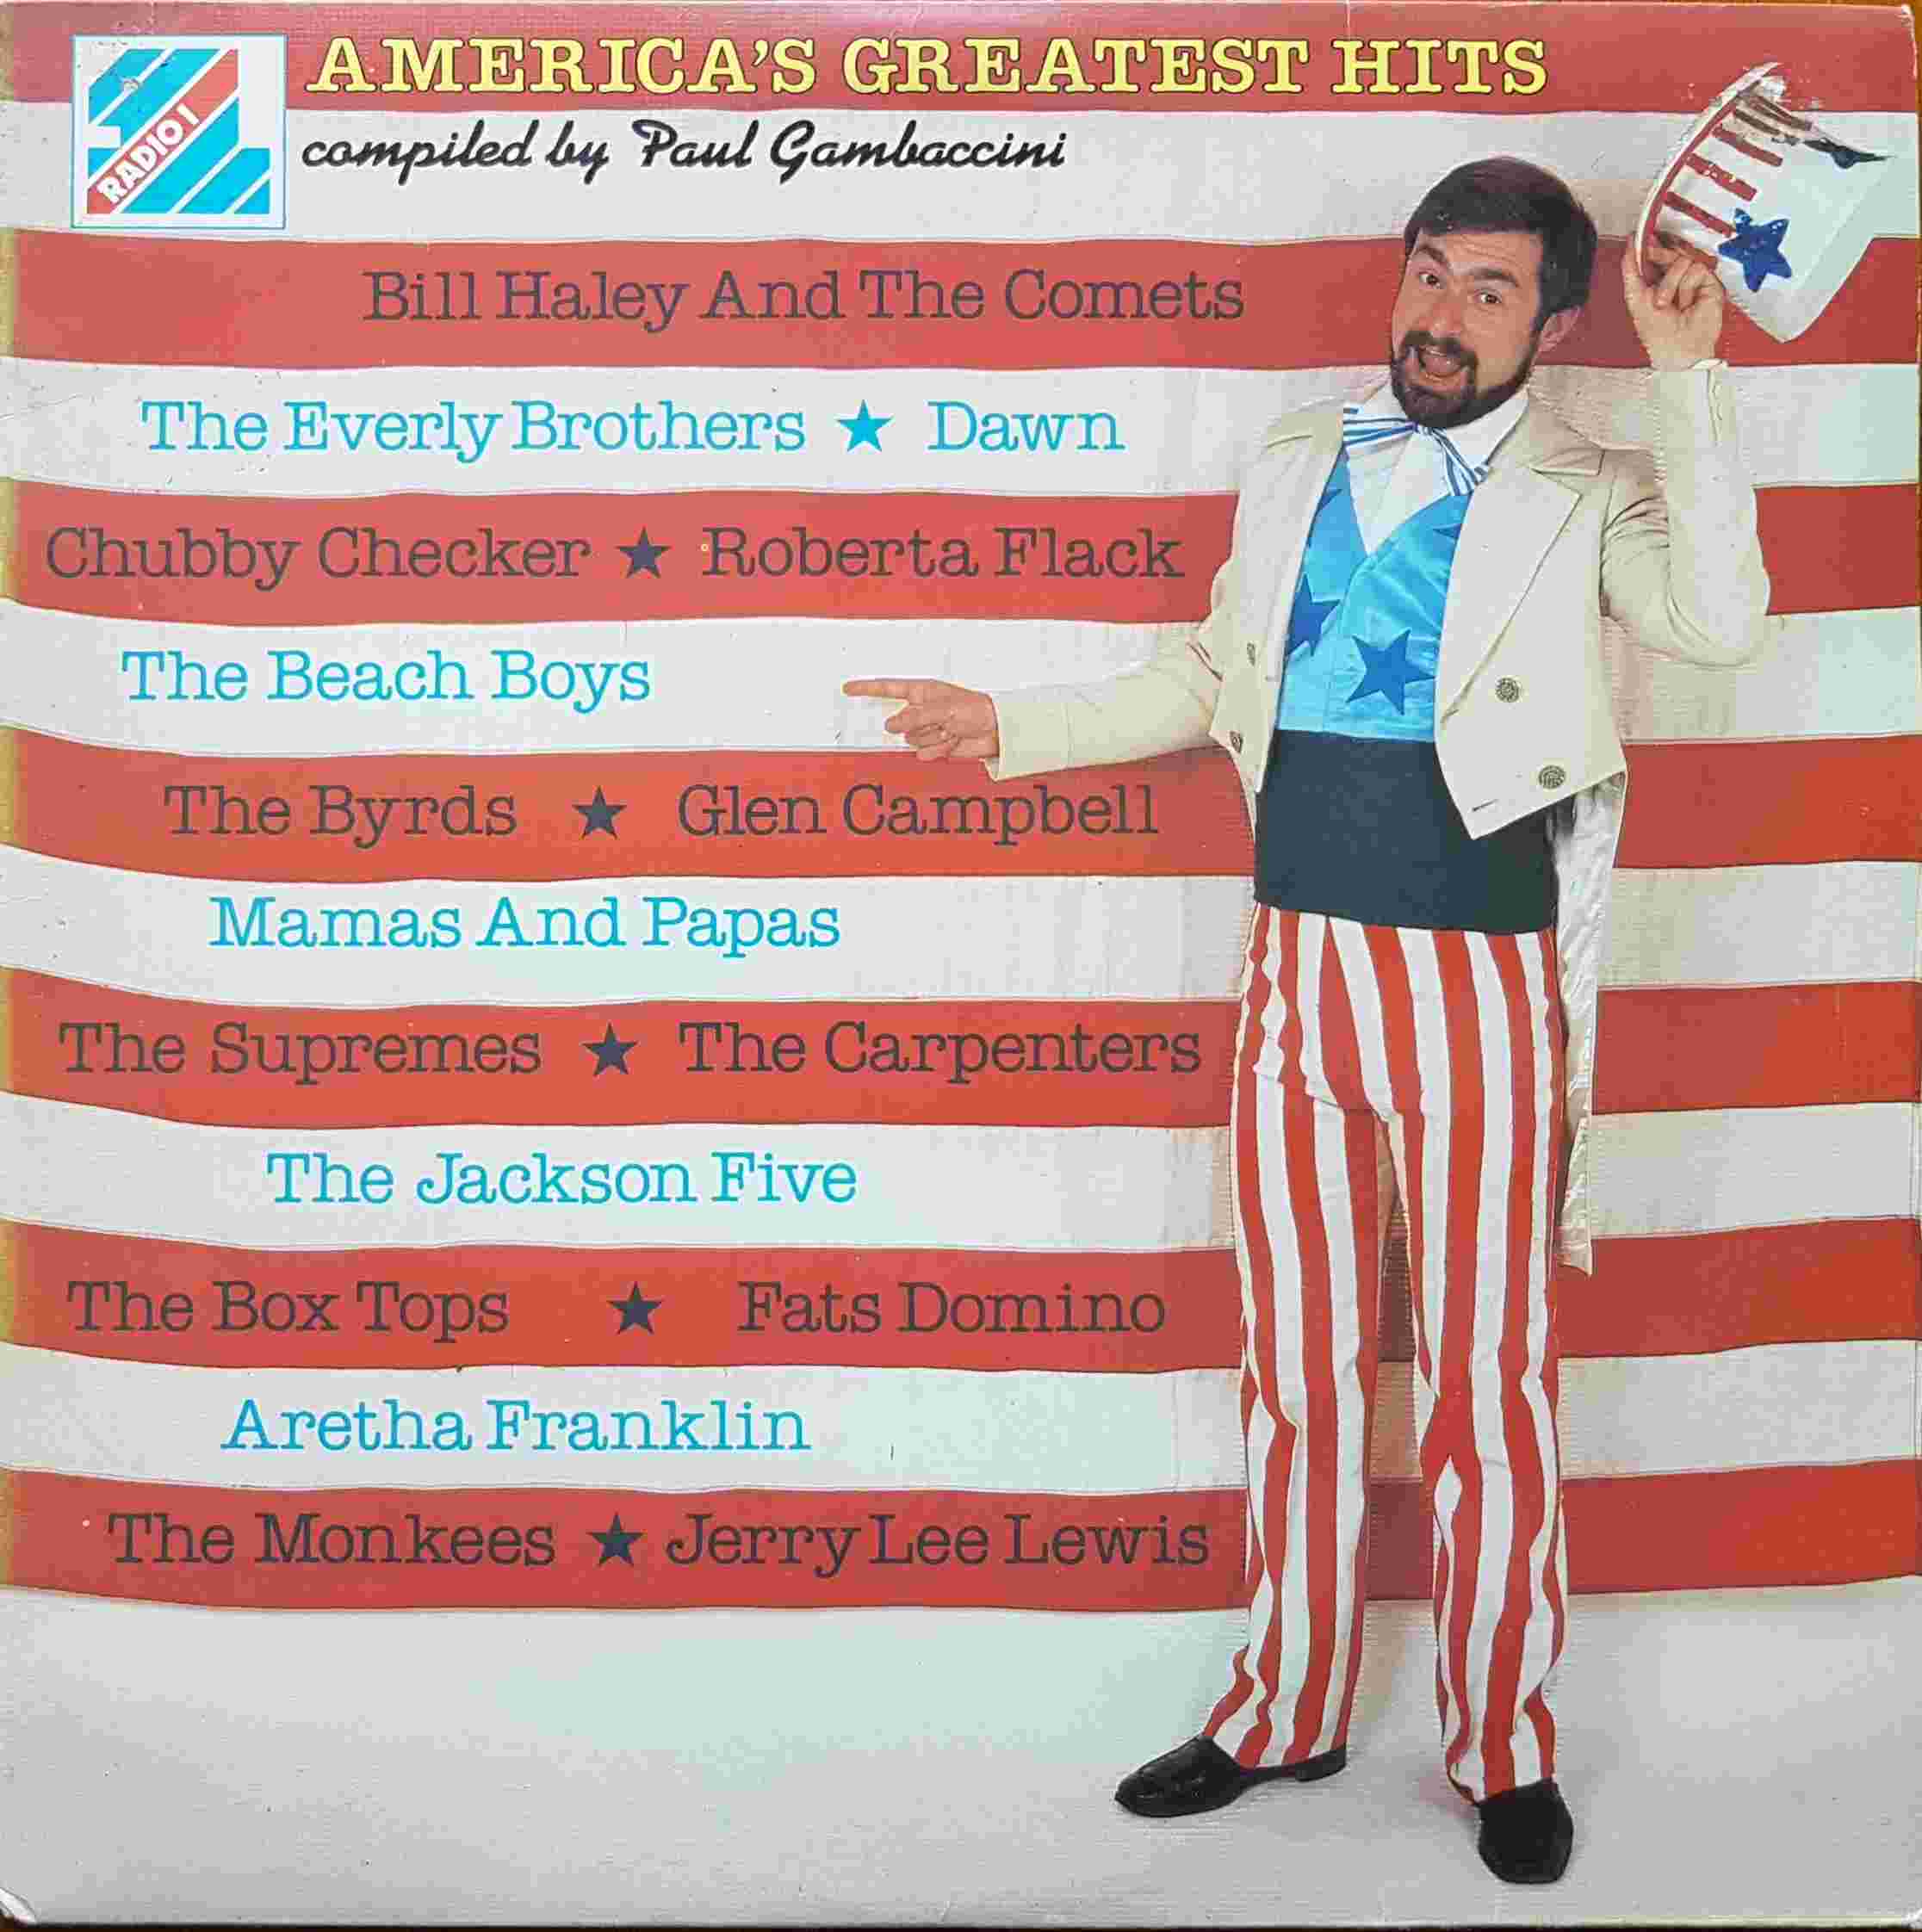 Picture of America's greatest hits by artist Various from the BBC albums - Records and Tapes library